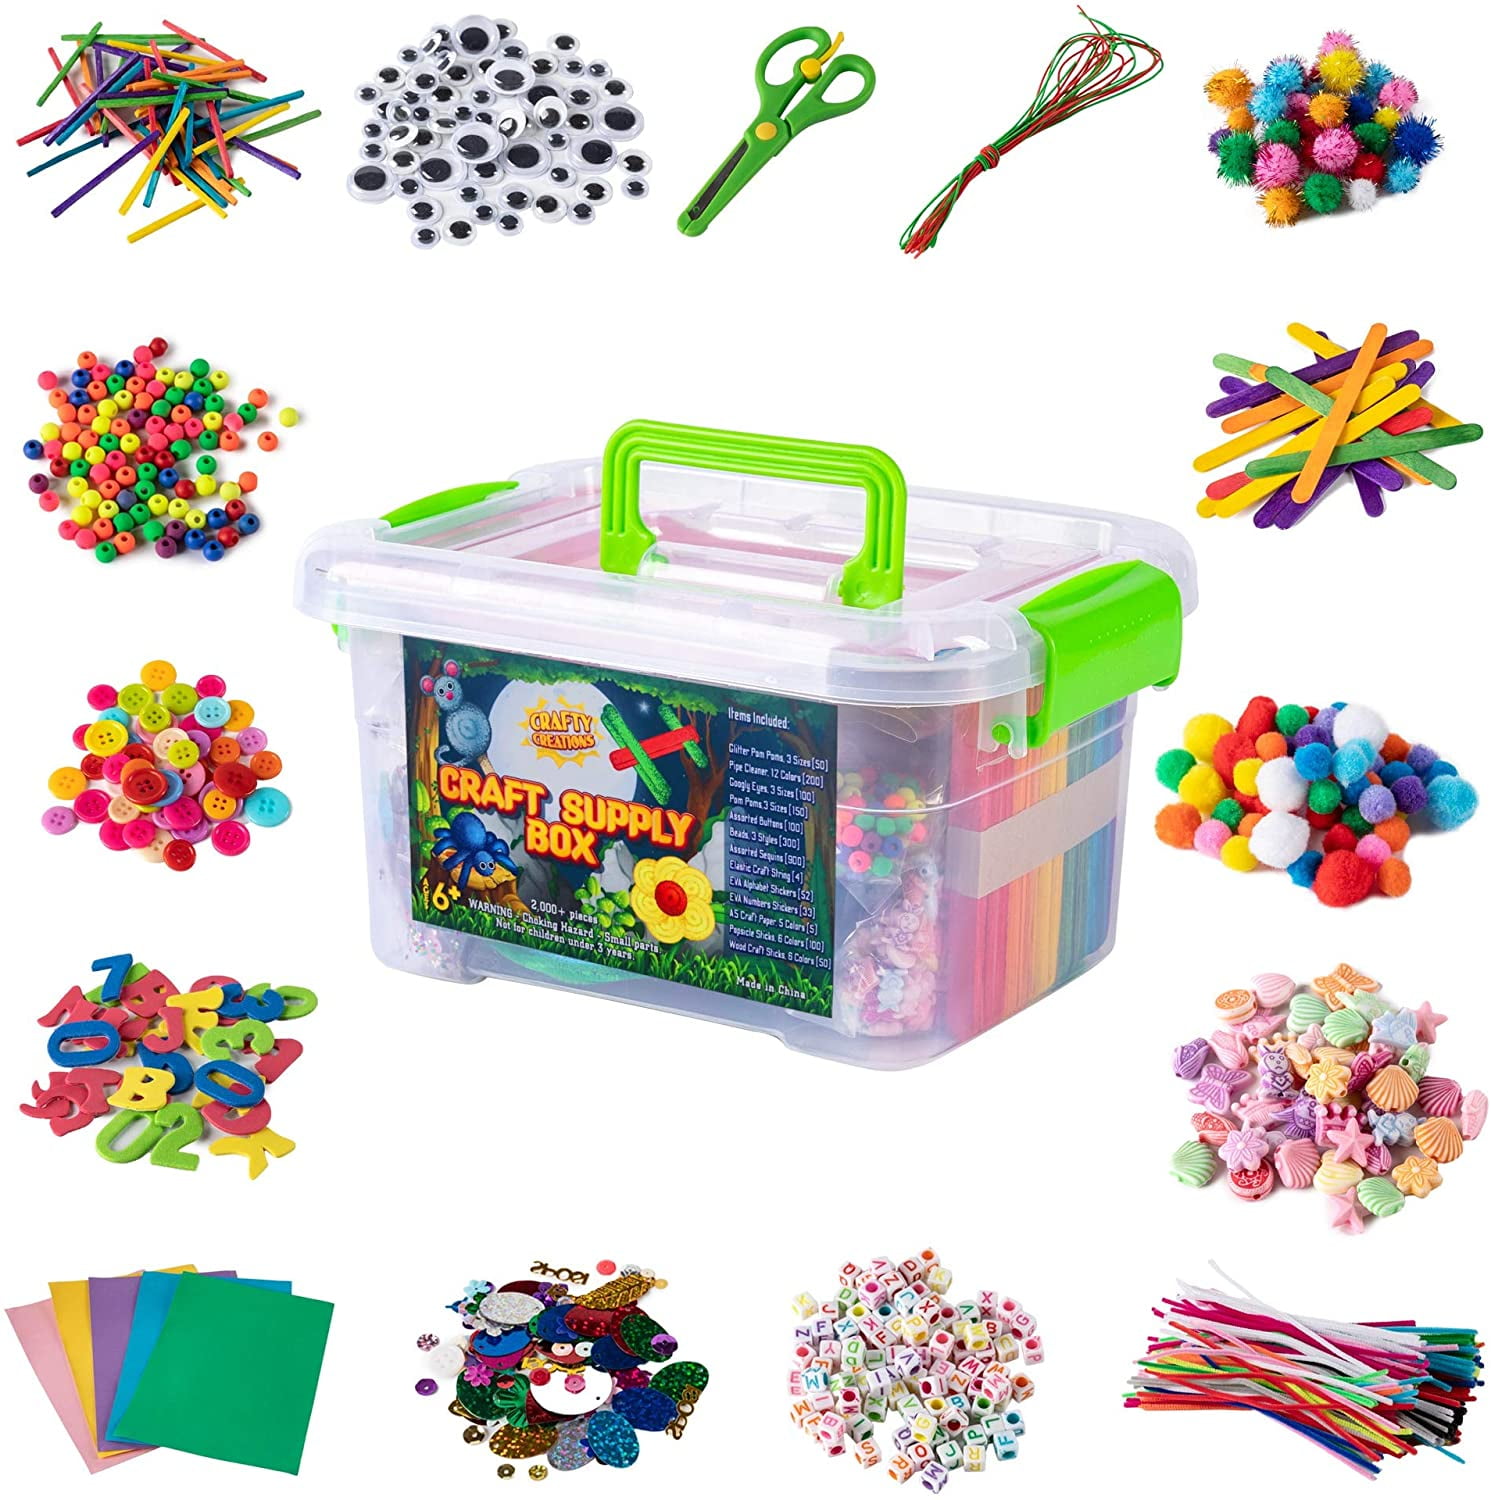 Arts and Crafts for Kids - *New 3000+ Piece Deluxe Craft Chest - Giant  Craft Box for Kids Art Supplies - Craft Kits for Kids Ages 4-12